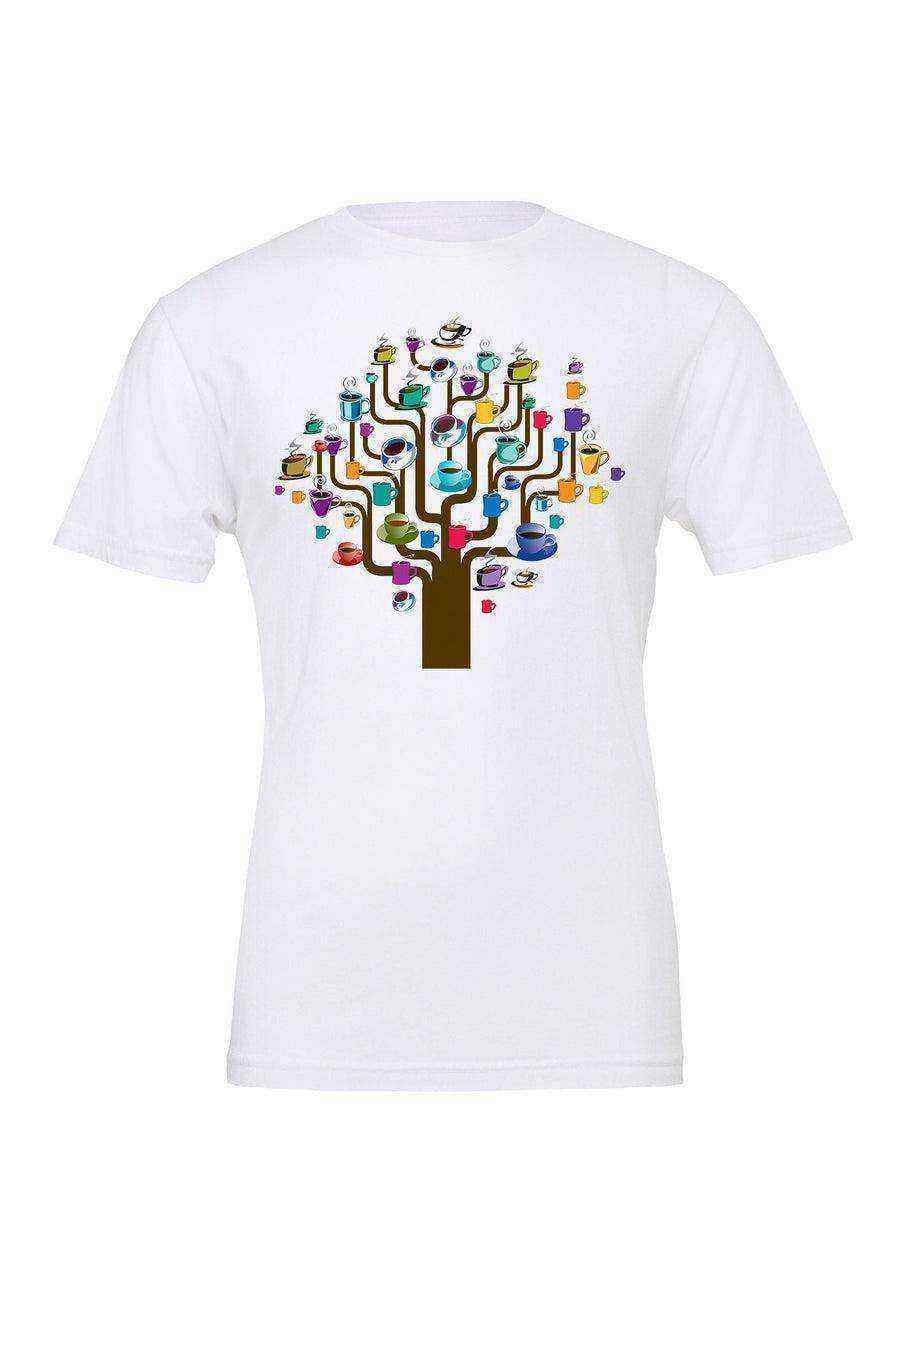 Toddler | Coffee Tree Of Life Shirt | Coffee Shirt | Coffee Lover - Dylan's Tees